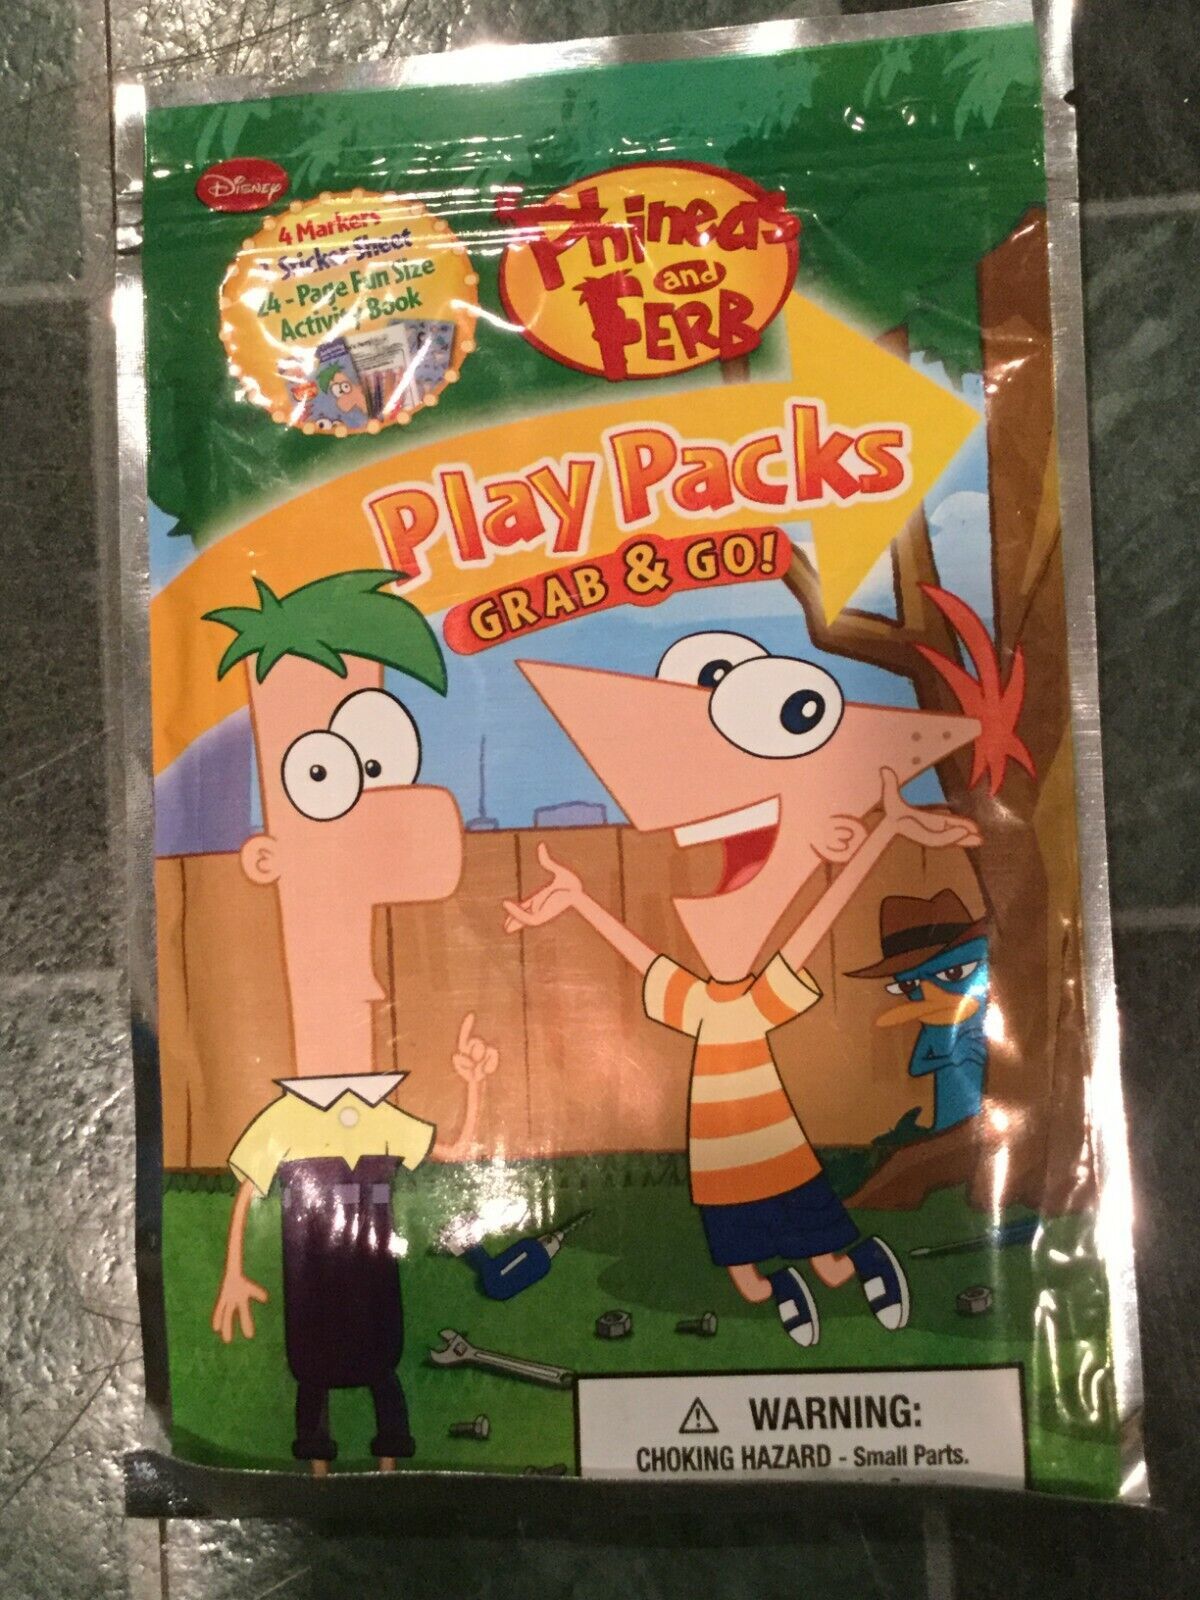 2010 Disney Phineas and Ferb Play Pack Grab & Go Activity Book  *NEW* tt1 - $9.99